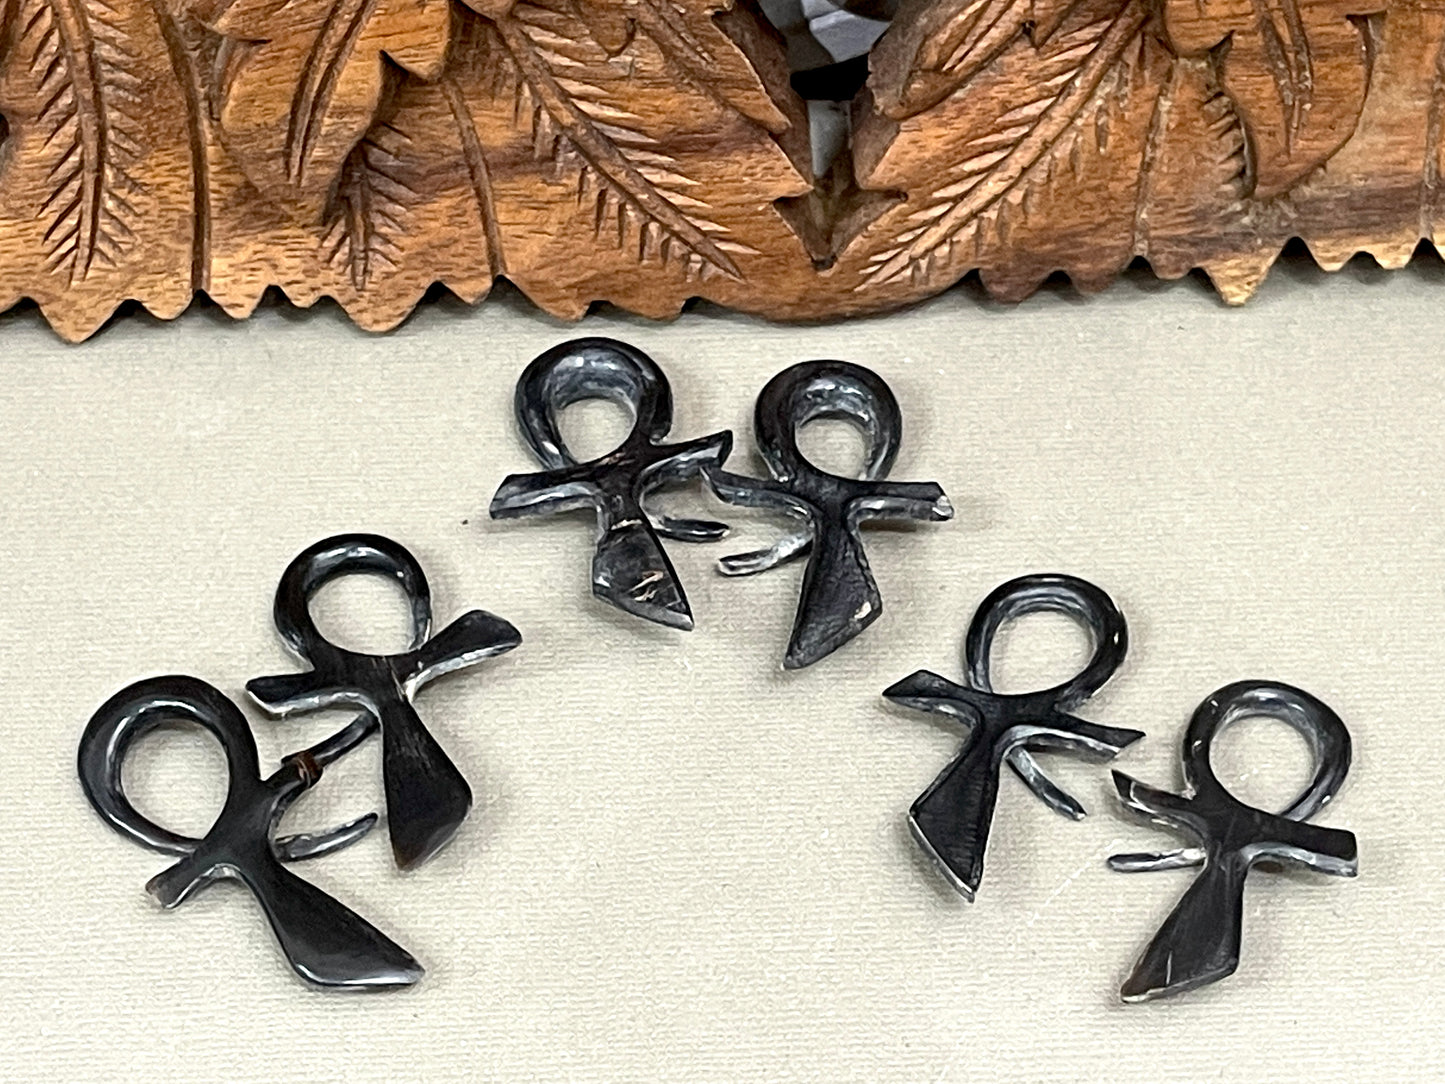 Ankh Gauged Earrings - Available in 6g-0g